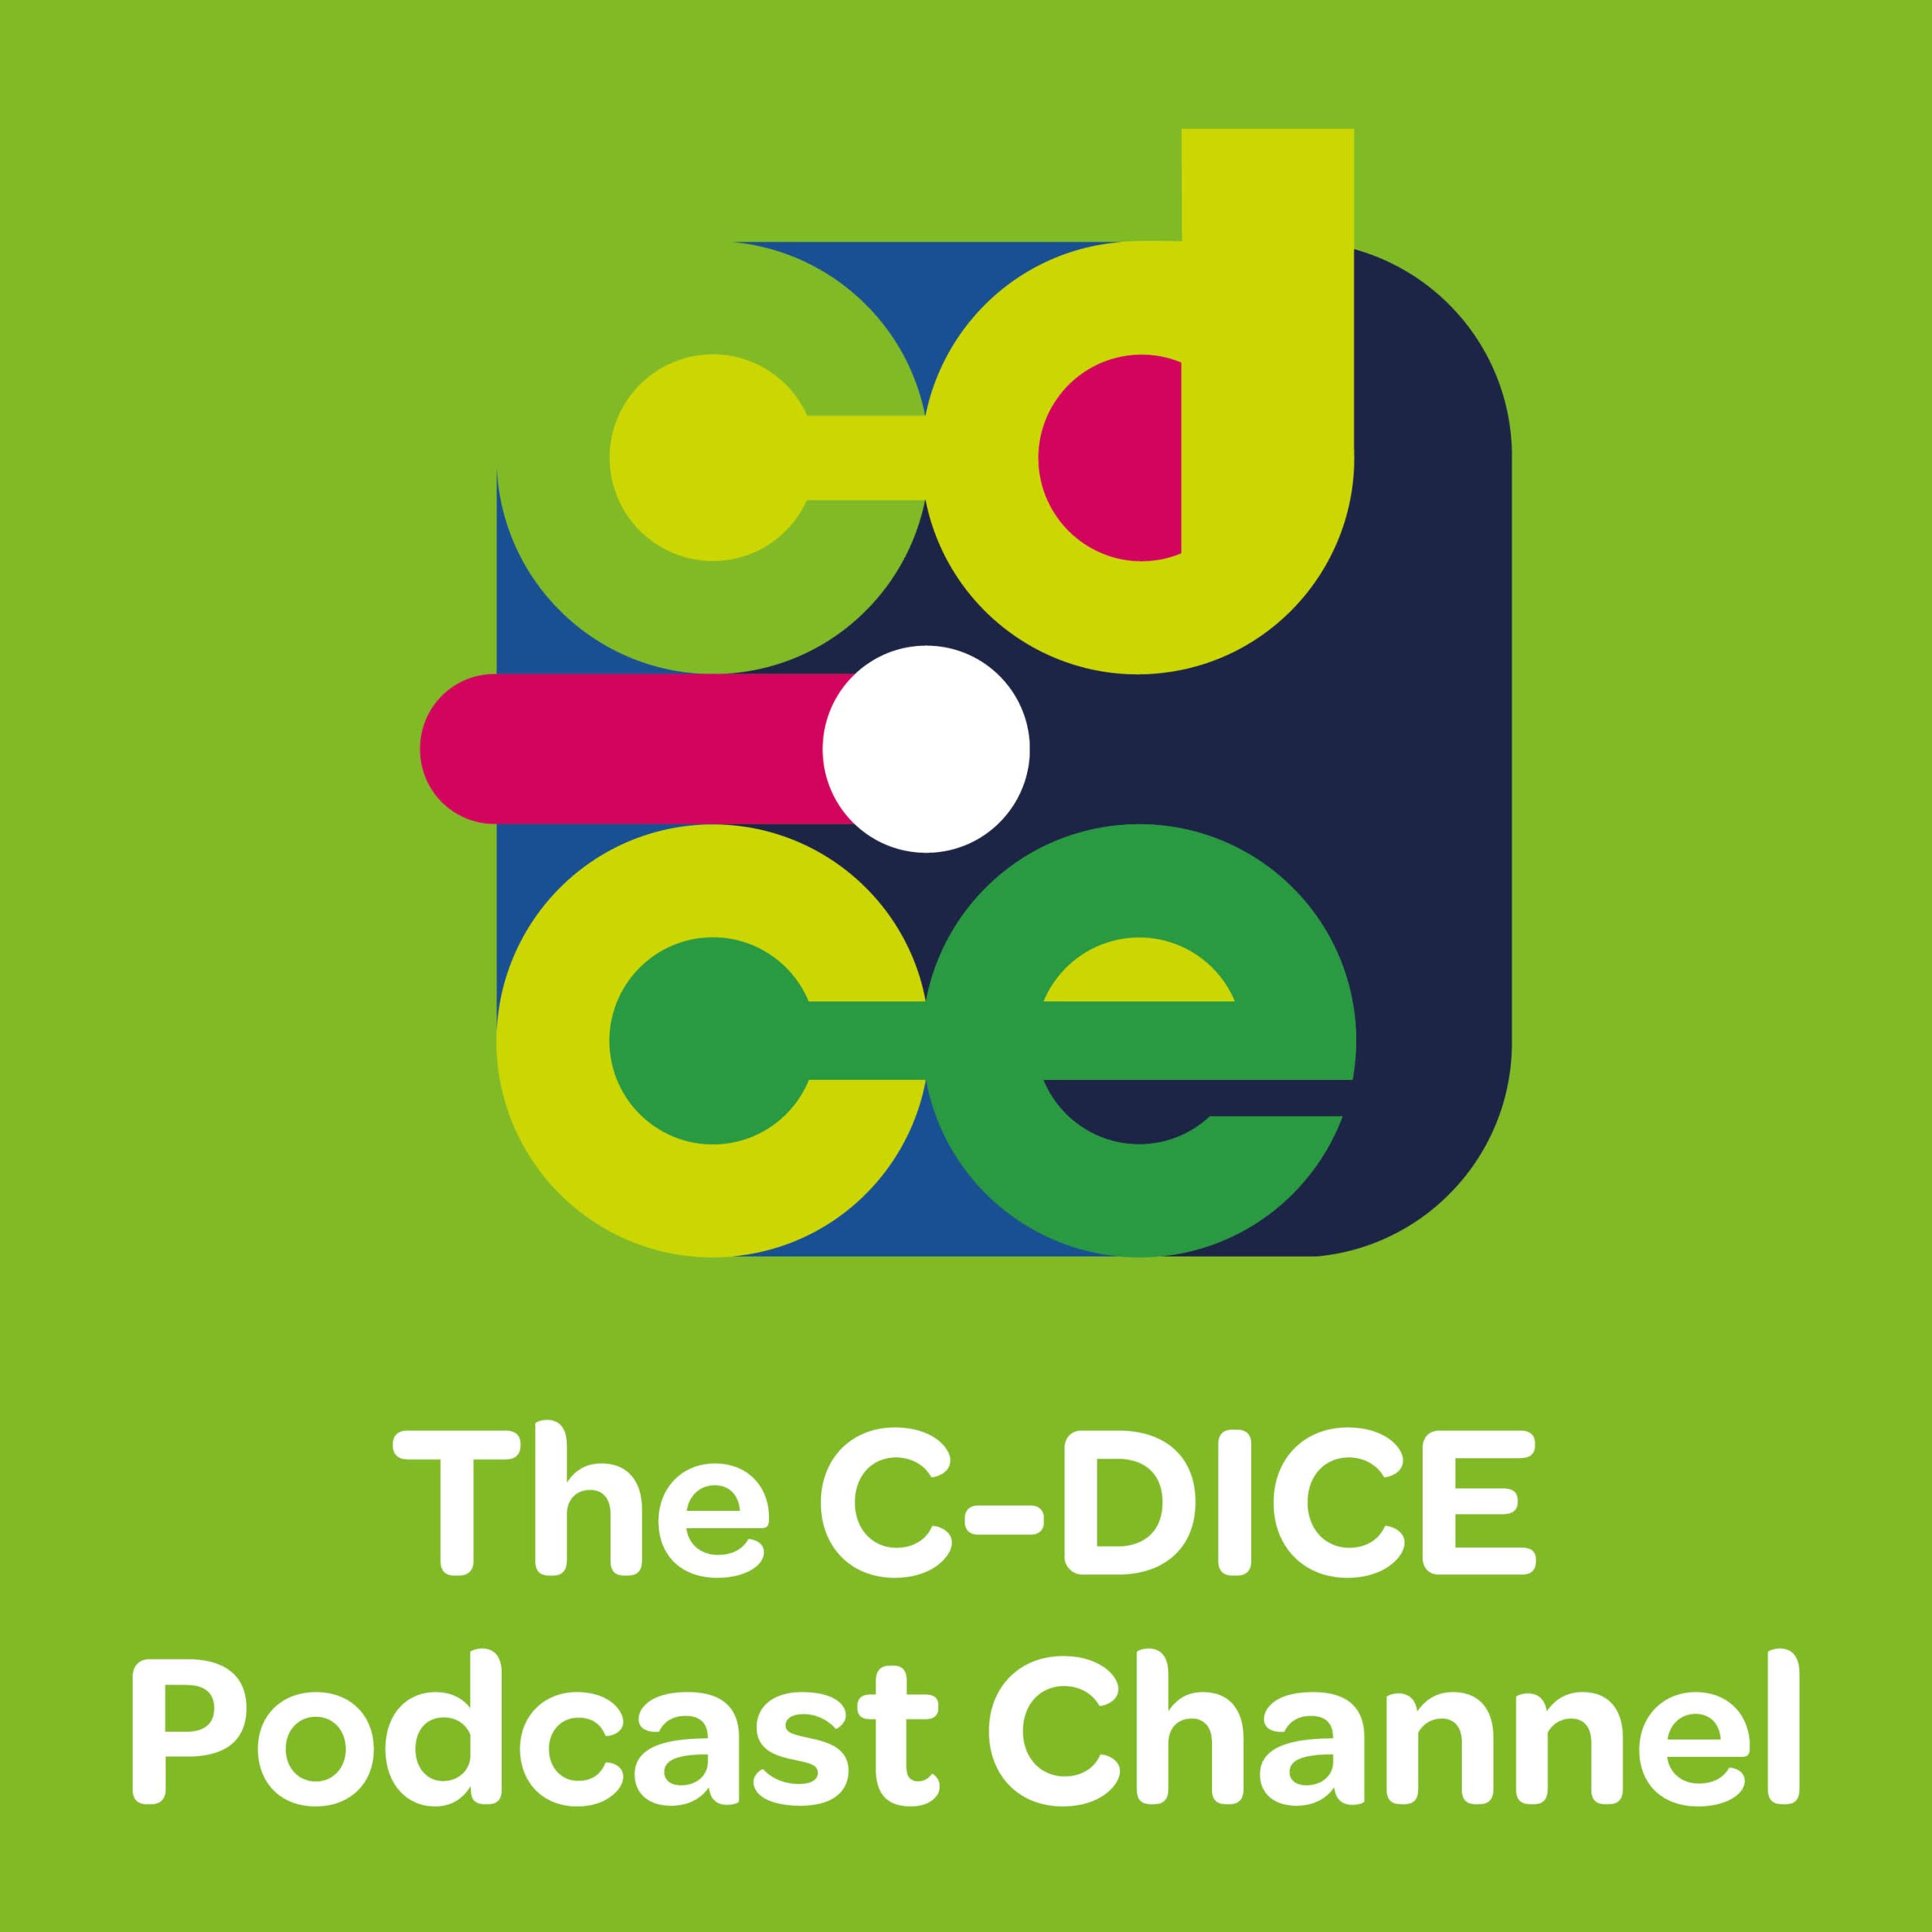 C-DICE Podcast – give your business a competitive edge